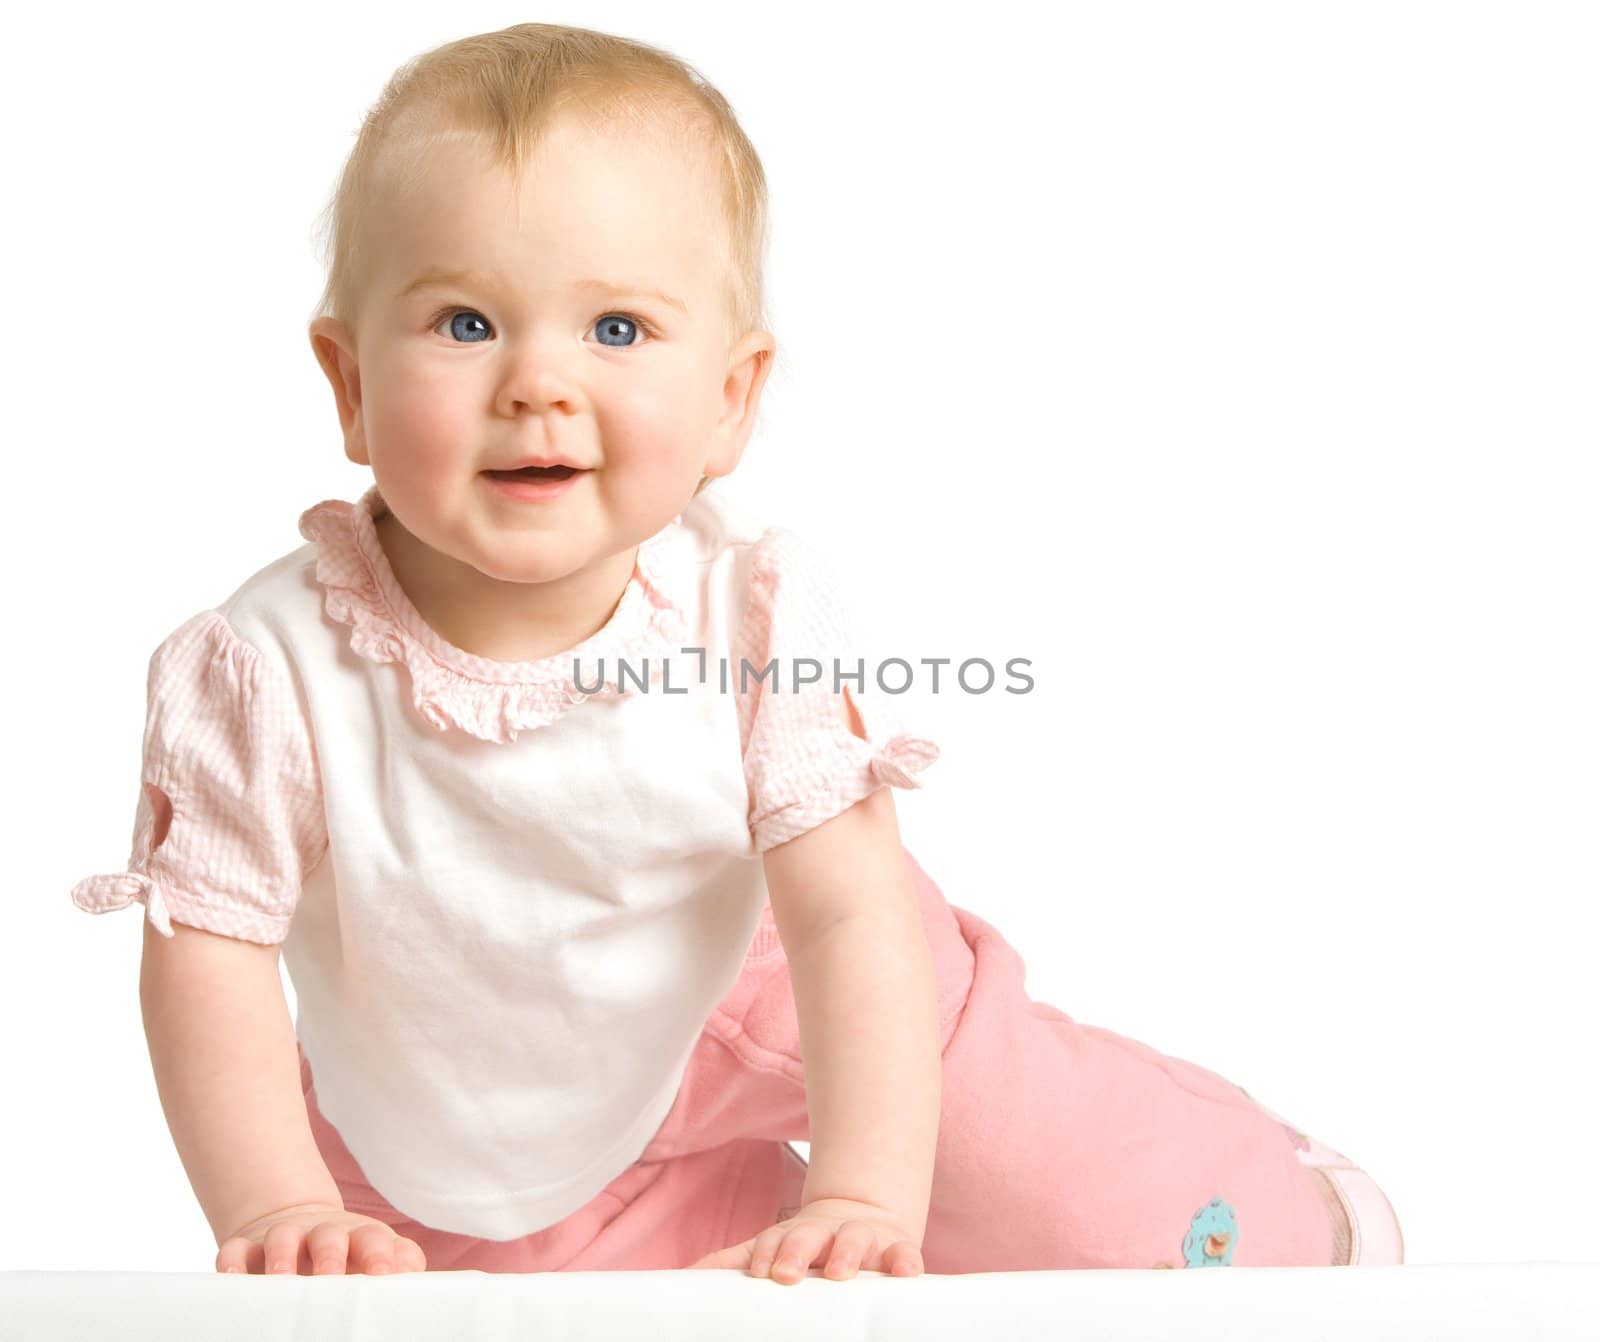 The nice small smiling girl creeps close up on a white background
